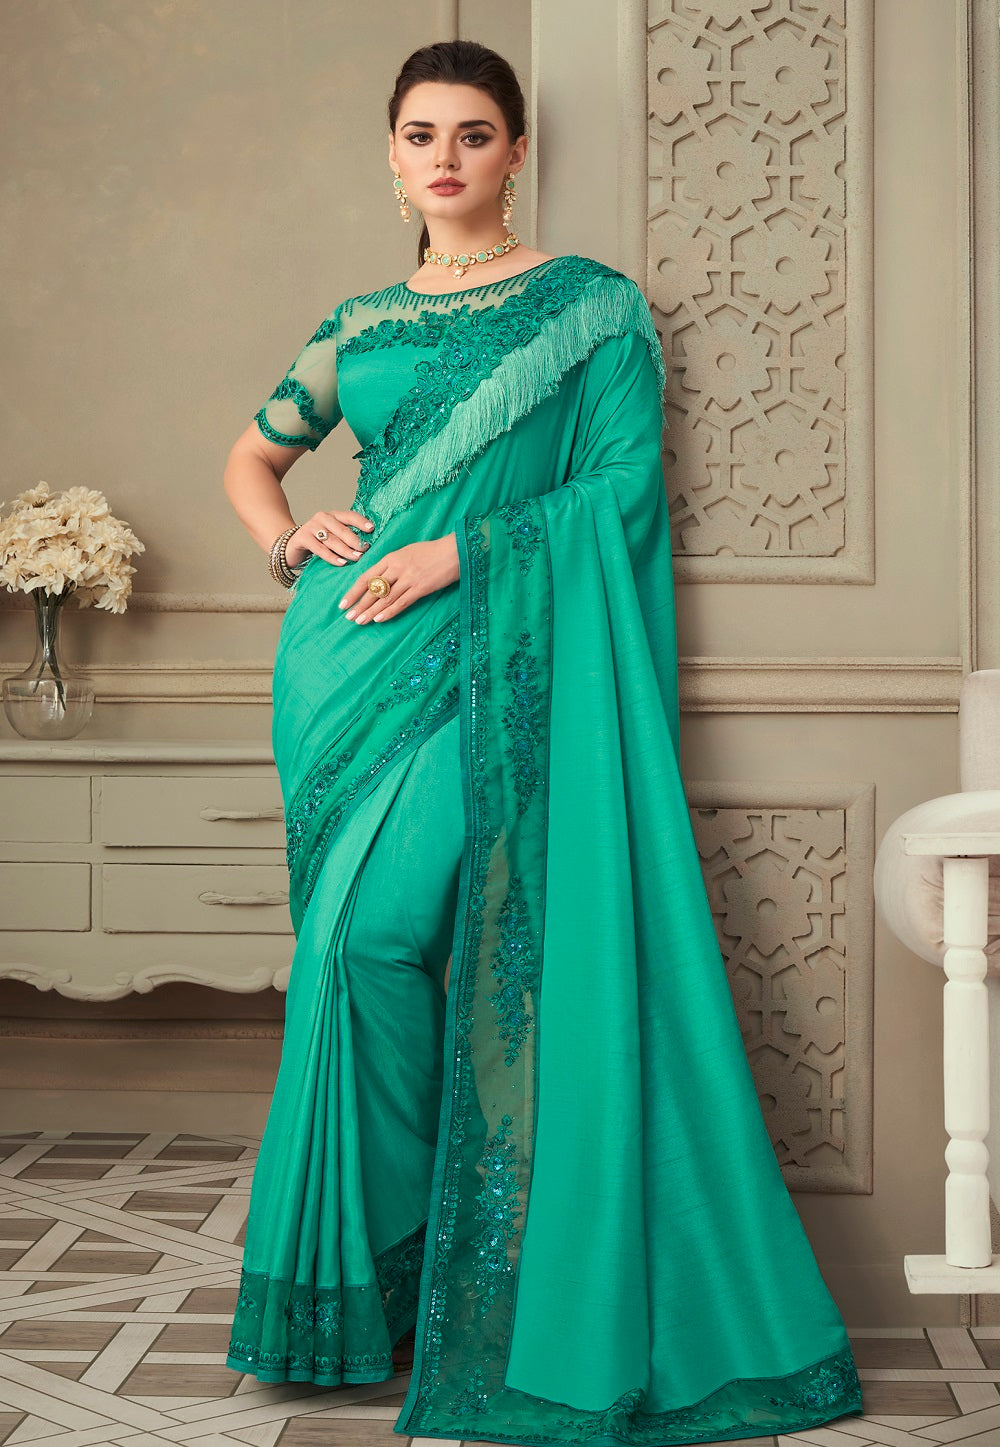 Embroidered Art Silk Saree in Teal Blue